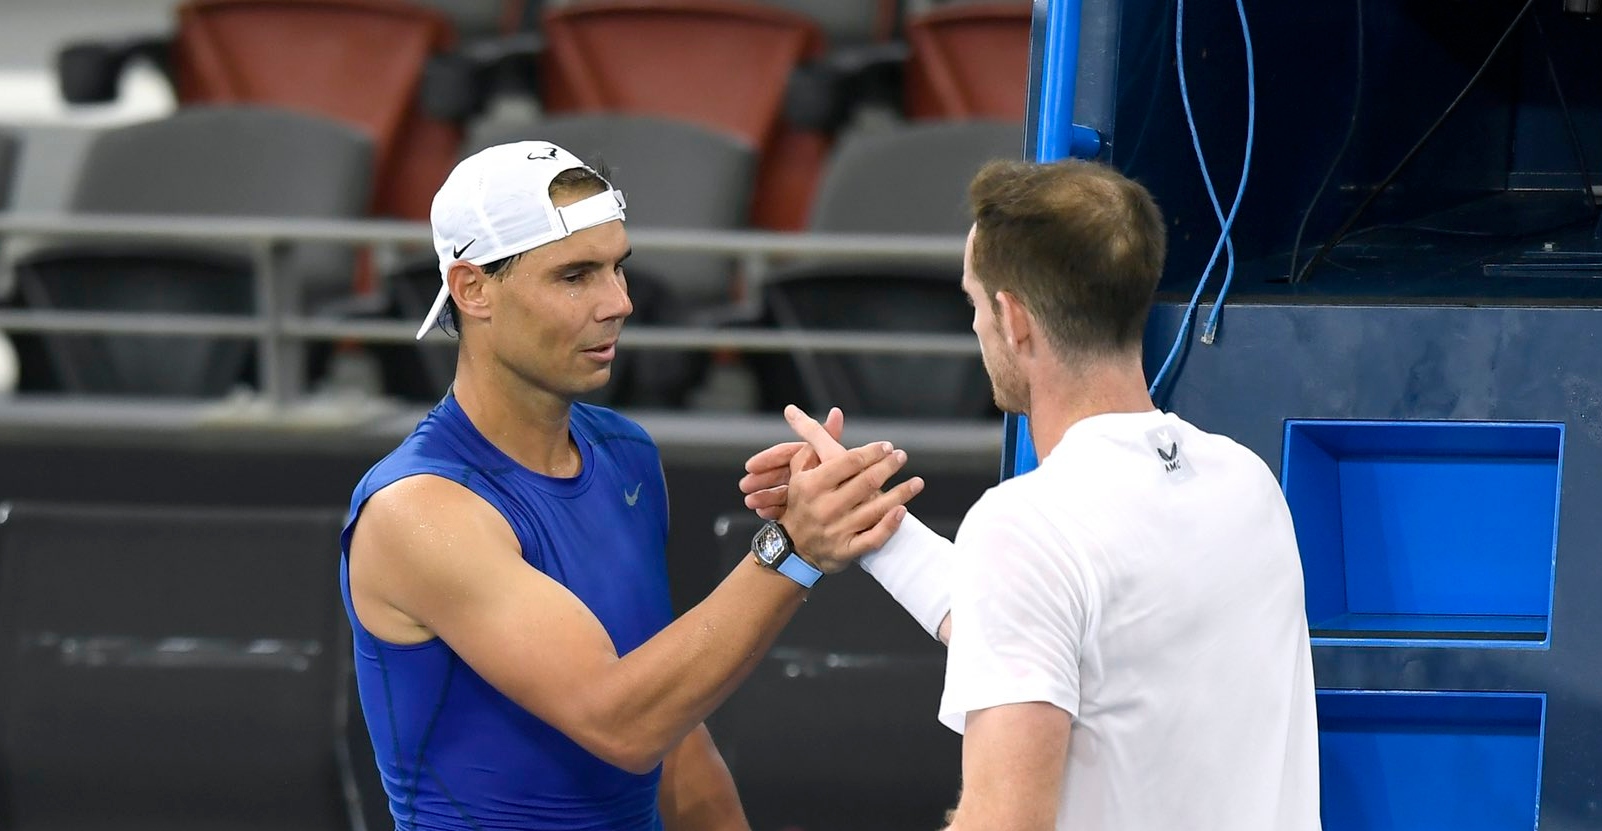 Murray wishes Nadal best of lucks in return from injury 25